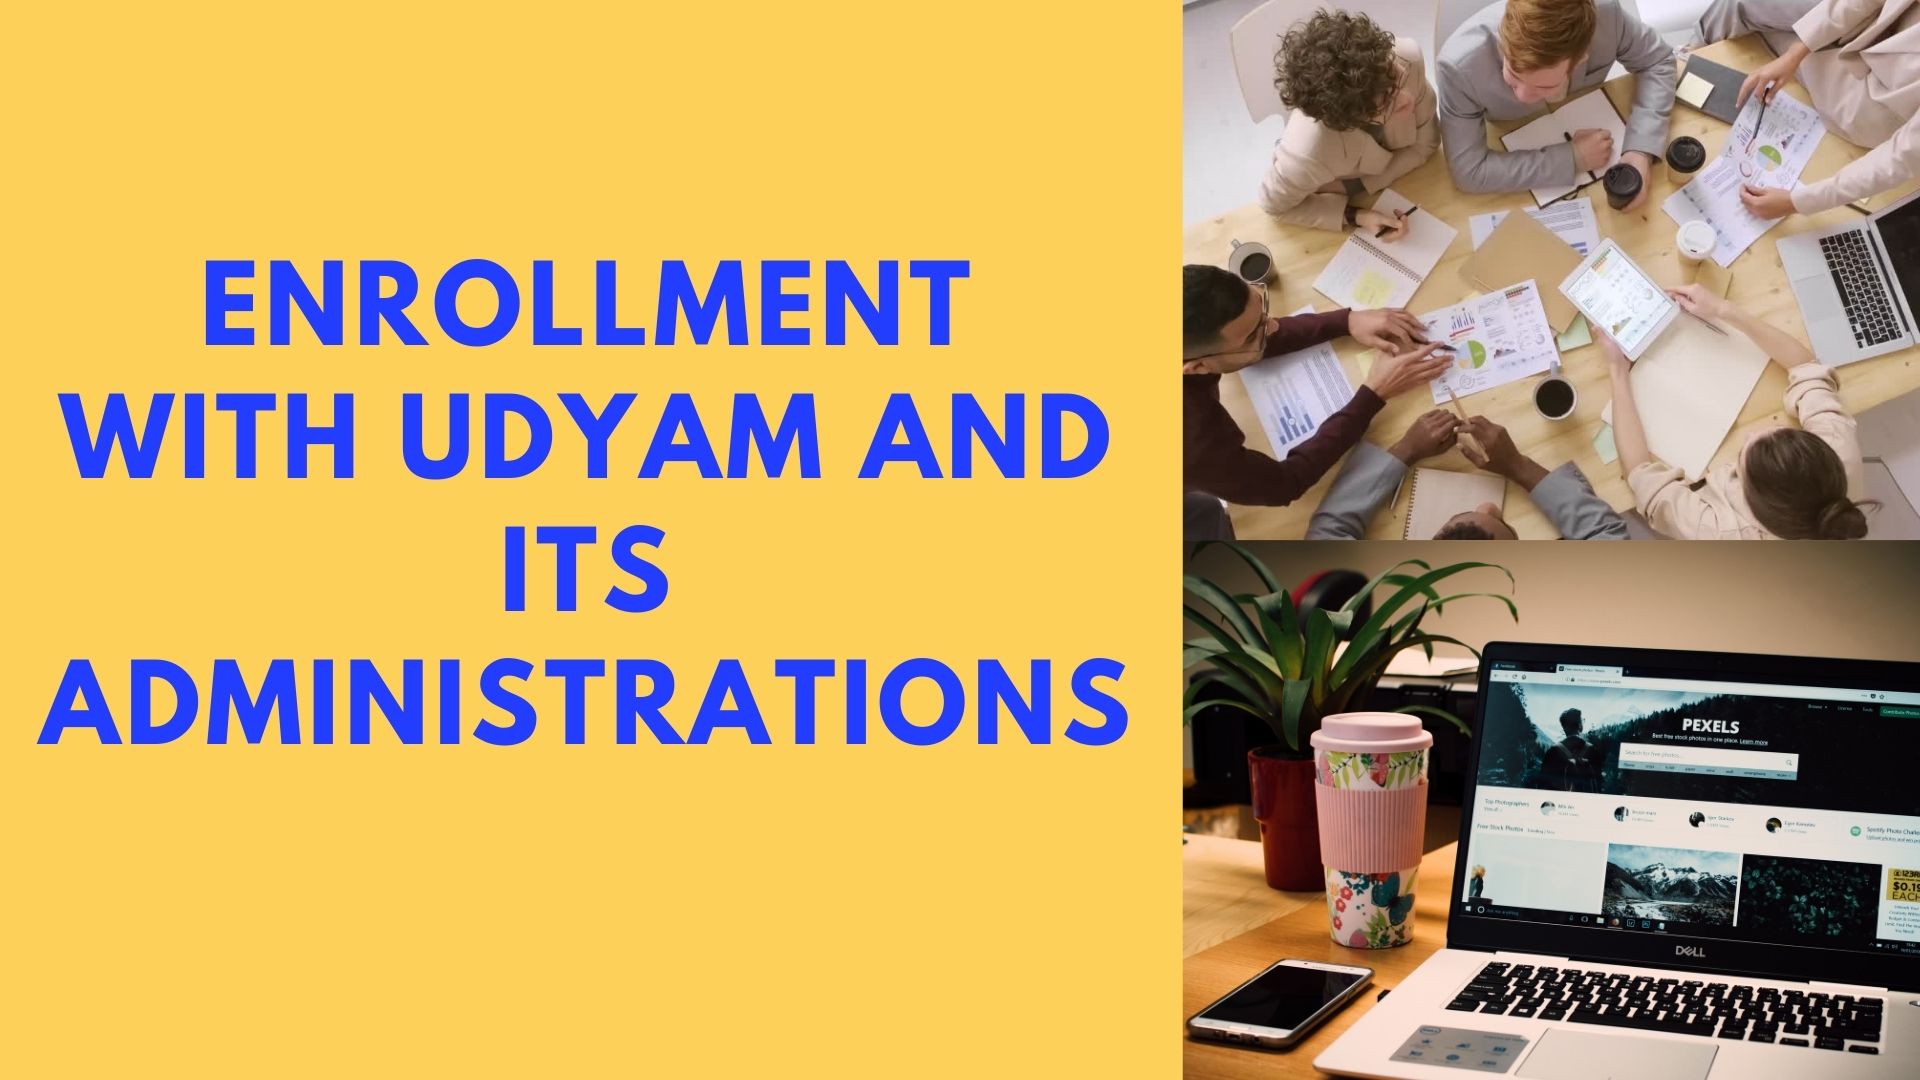 Enrollment with Udyam and its administrations